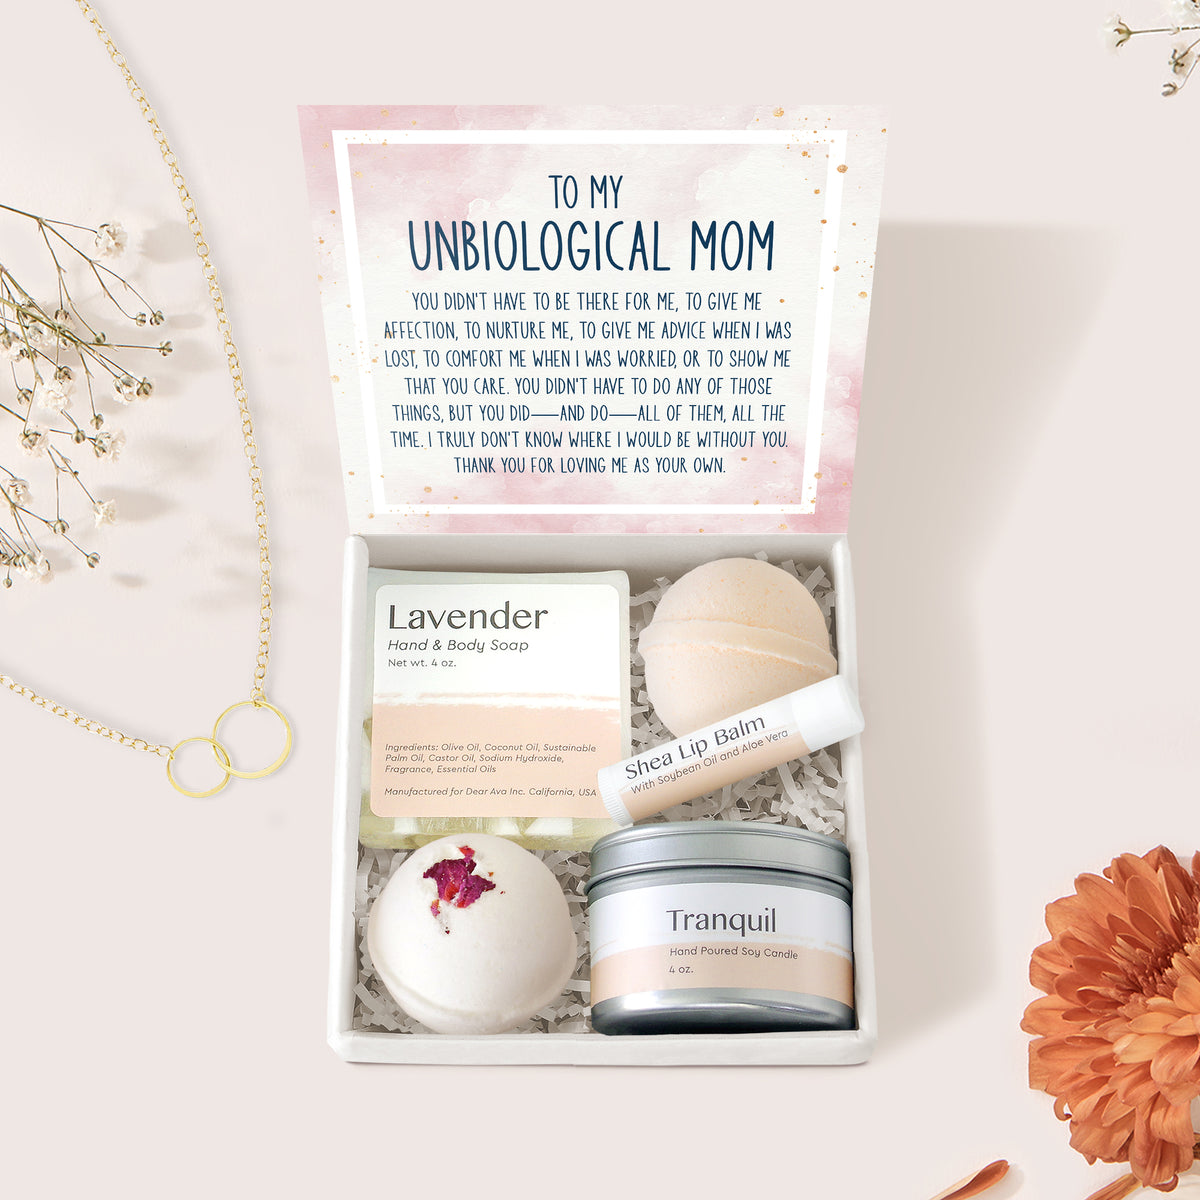 Unbiological Mom Double Circle Necklace Spa Gift Box Set